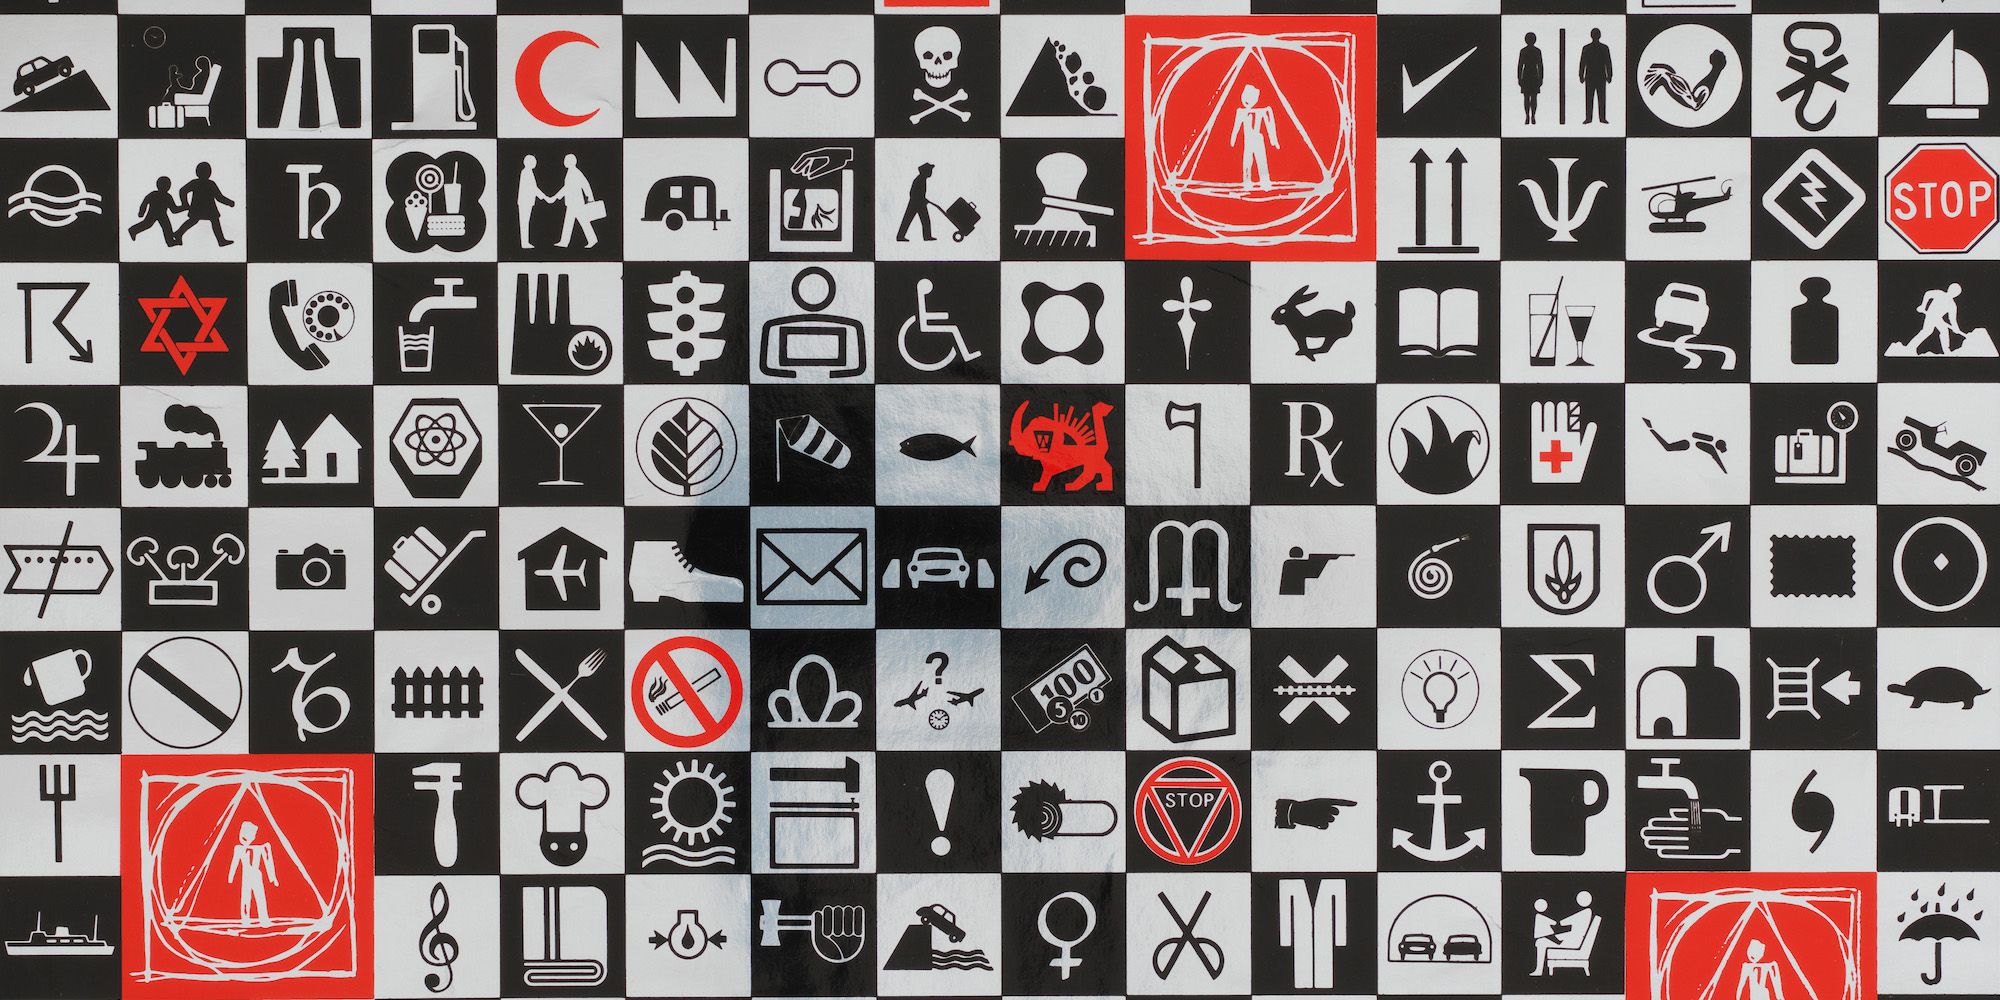 Illustration of various symbols in black, white and red